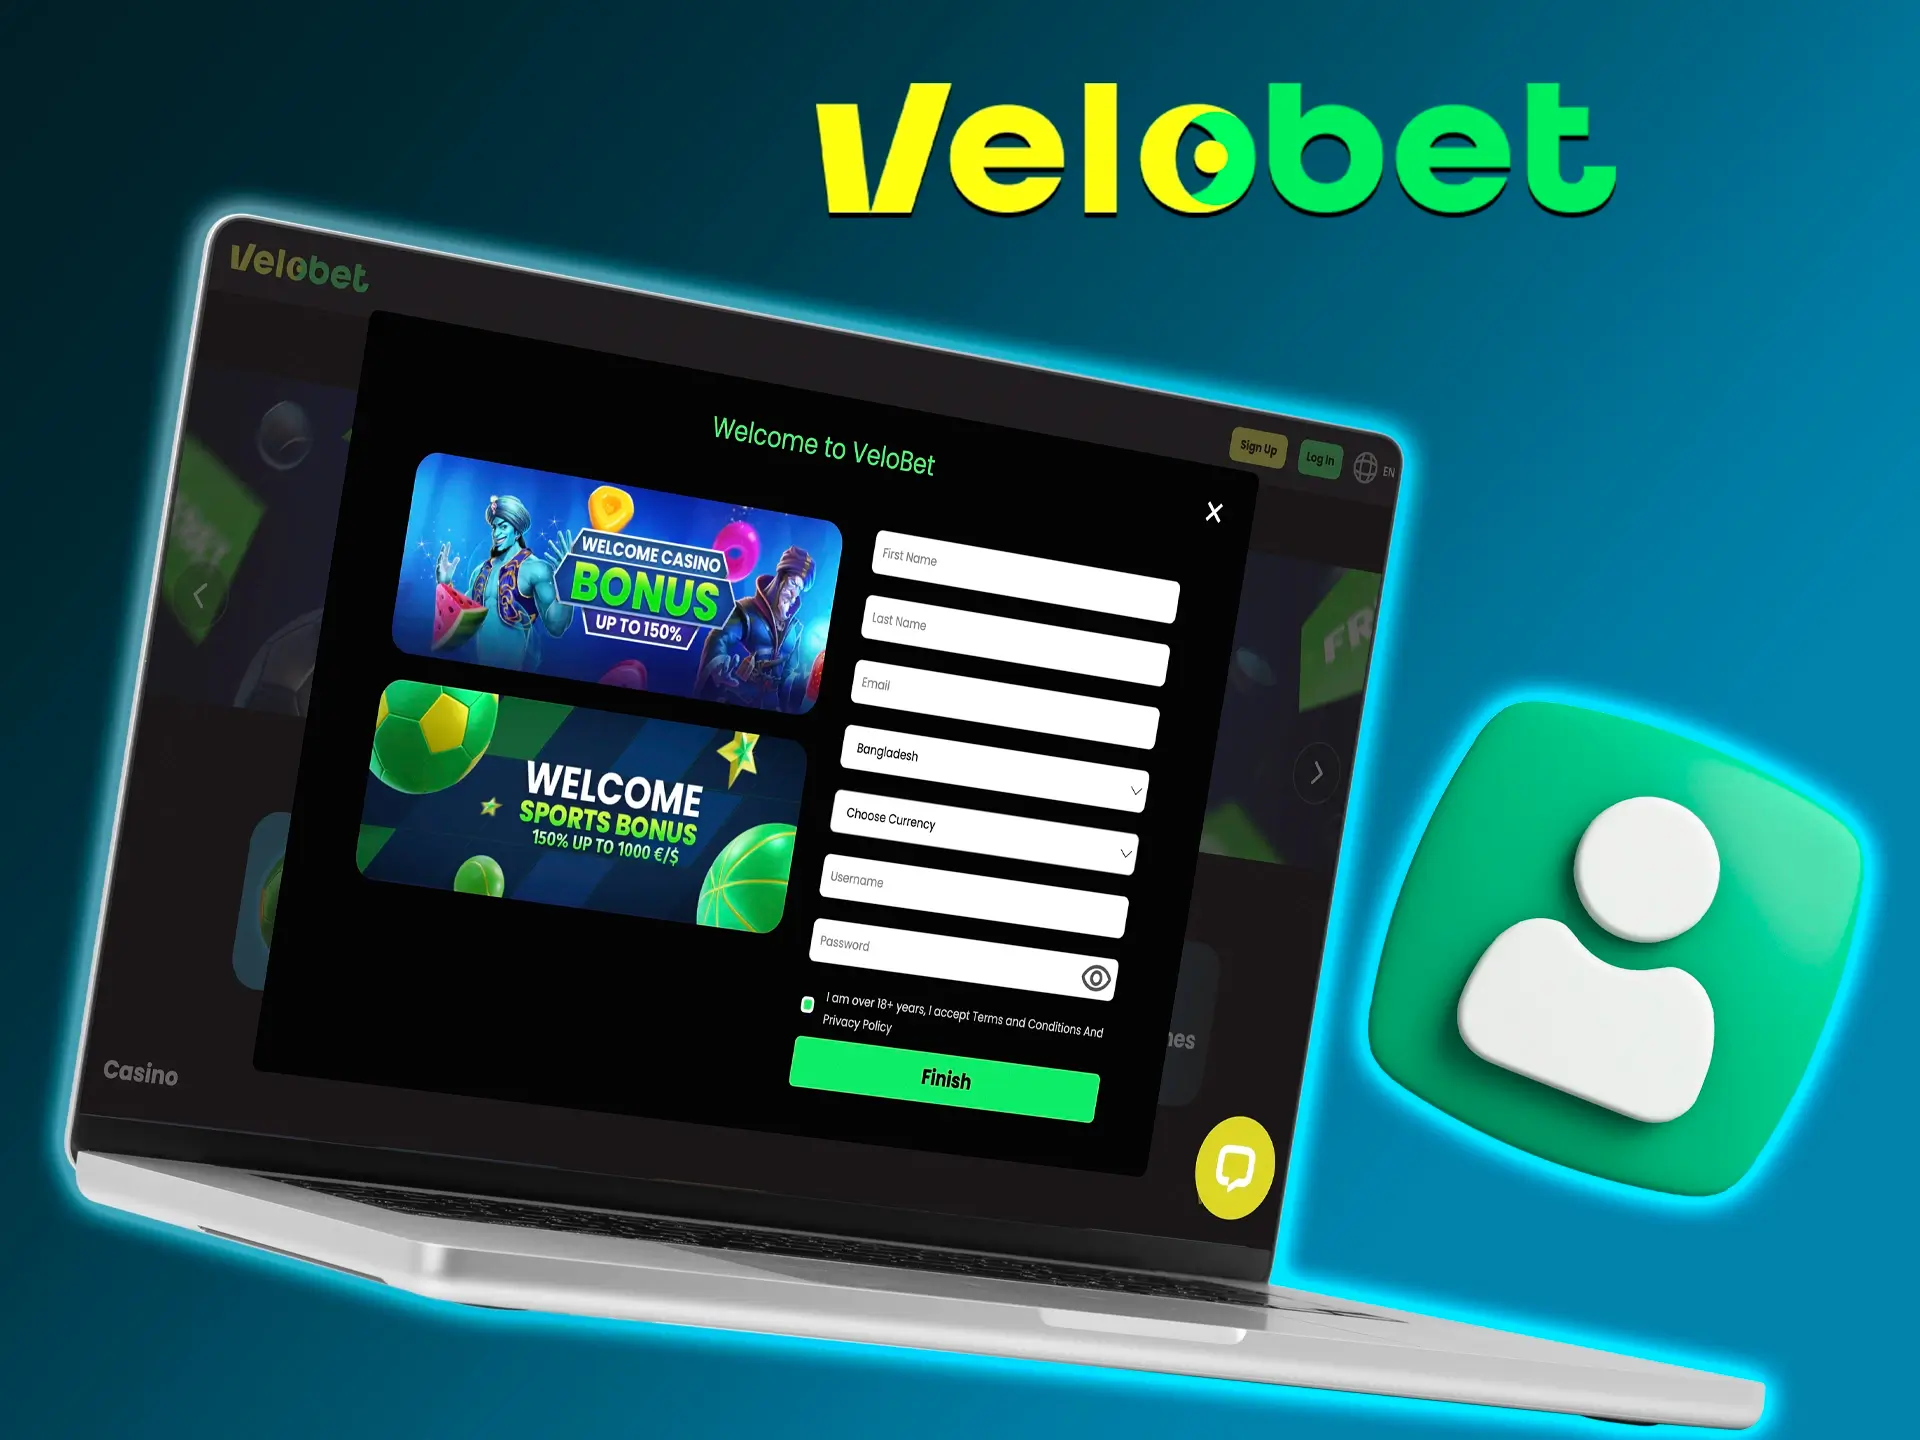 Perform a simple registration at Velobet Casino that any user can handle.